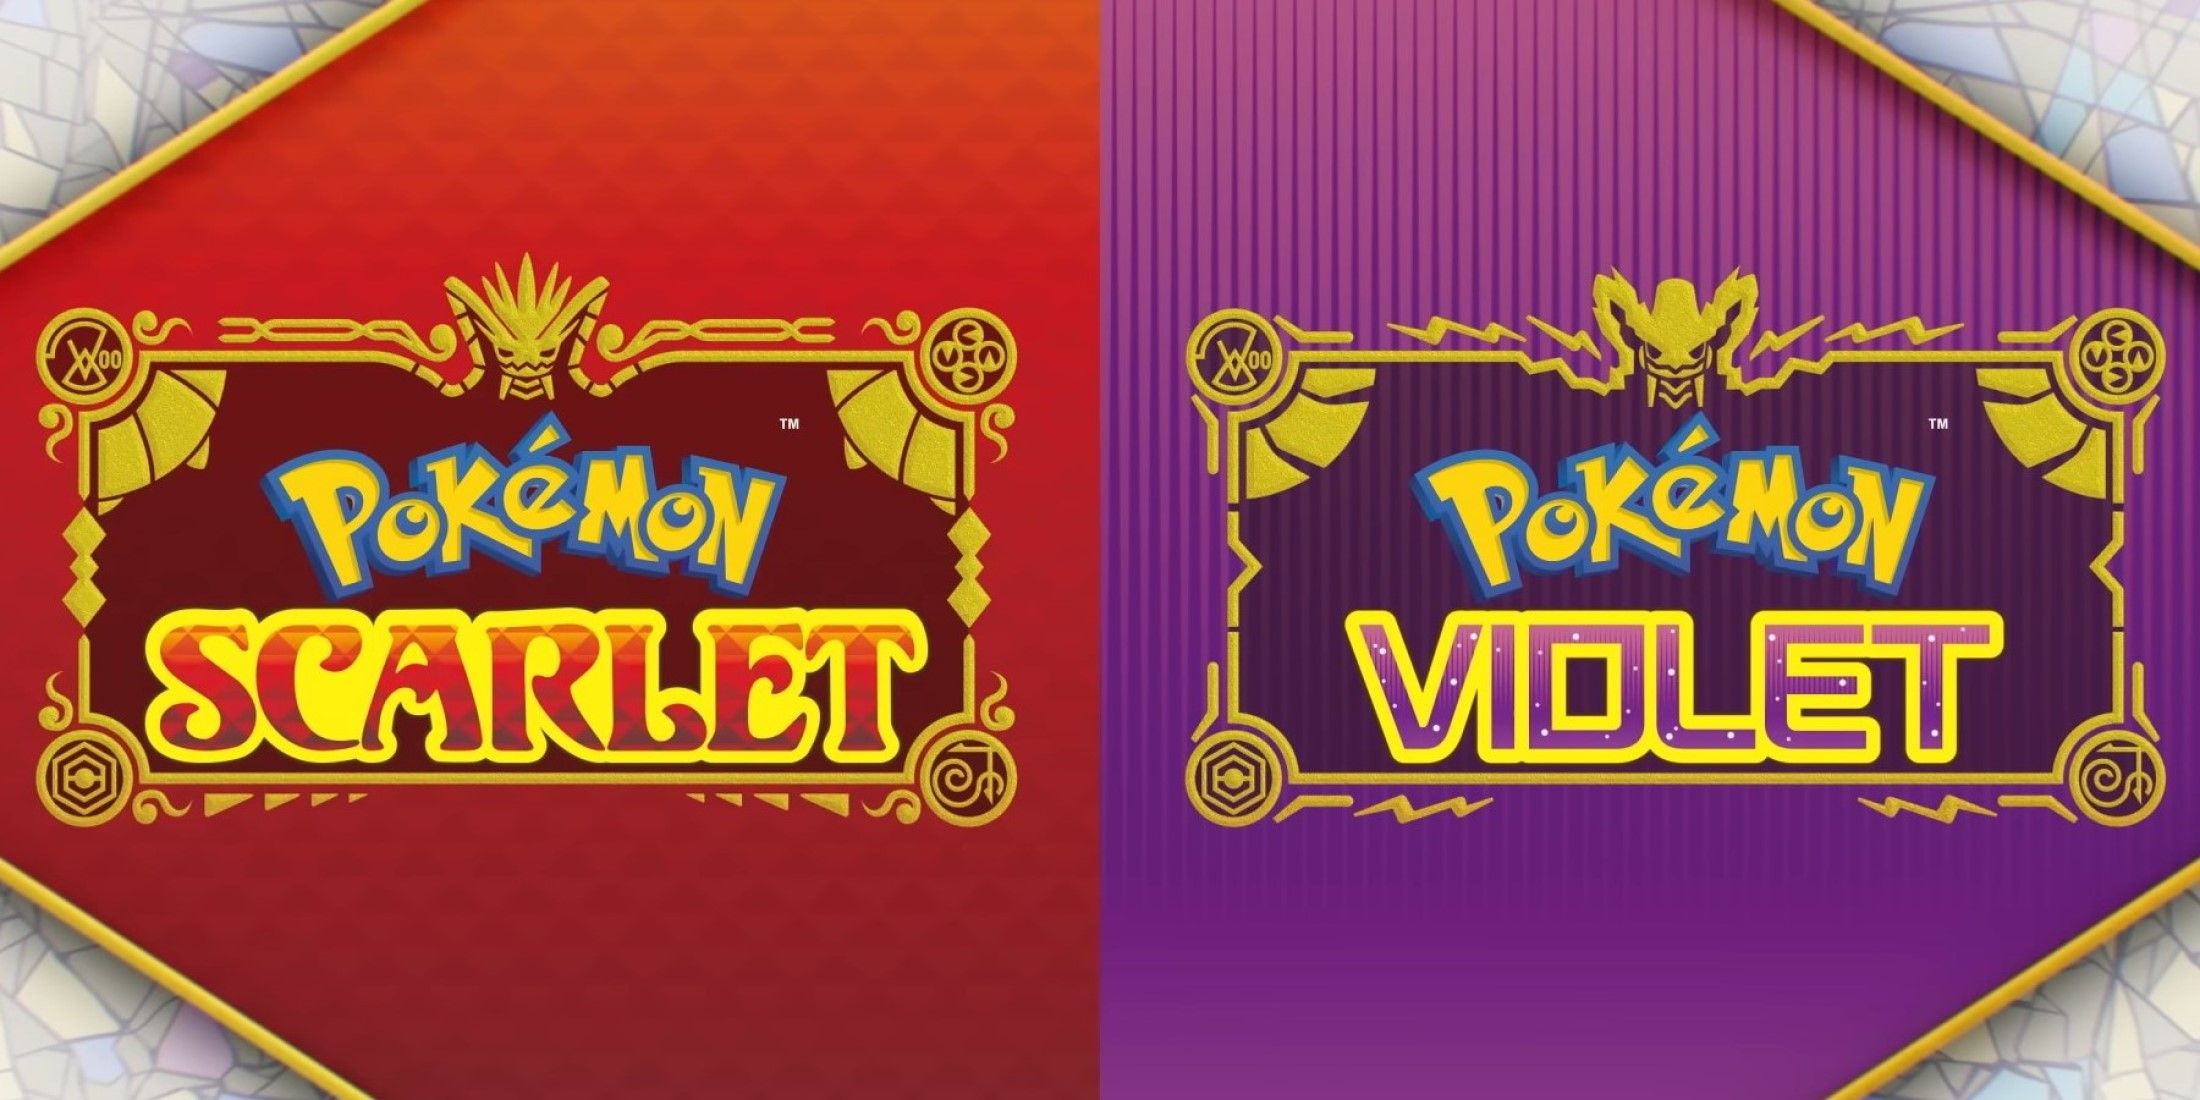 pokemon-scarlet-and-violet-logos-colored-backgrounds-red-purple-1